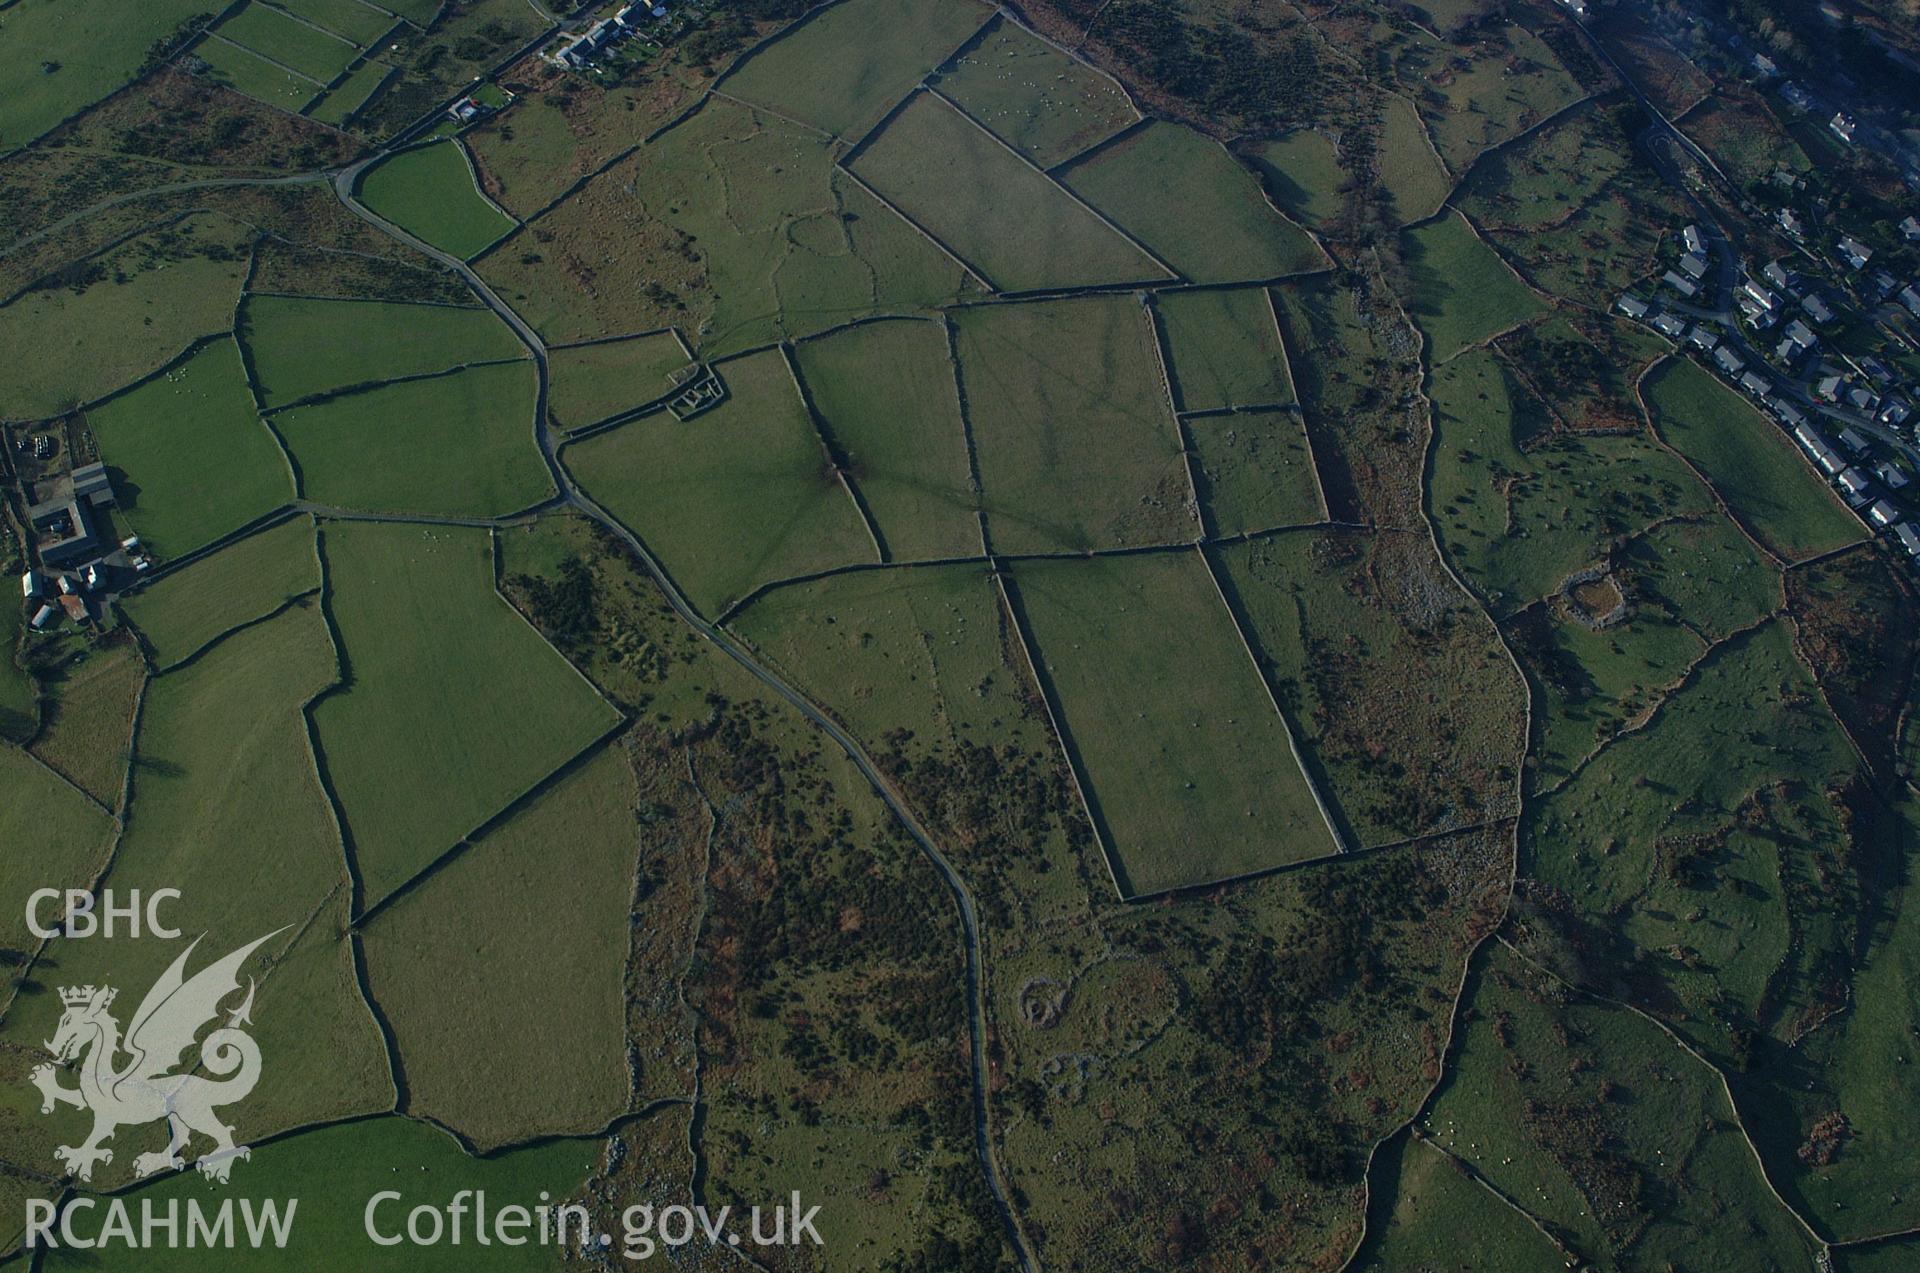 RCAHMW colour oblique aerial photograph of Muriau-y-gwyddelod Settlement Complex taken on 24/01/2005 by Toby Driver